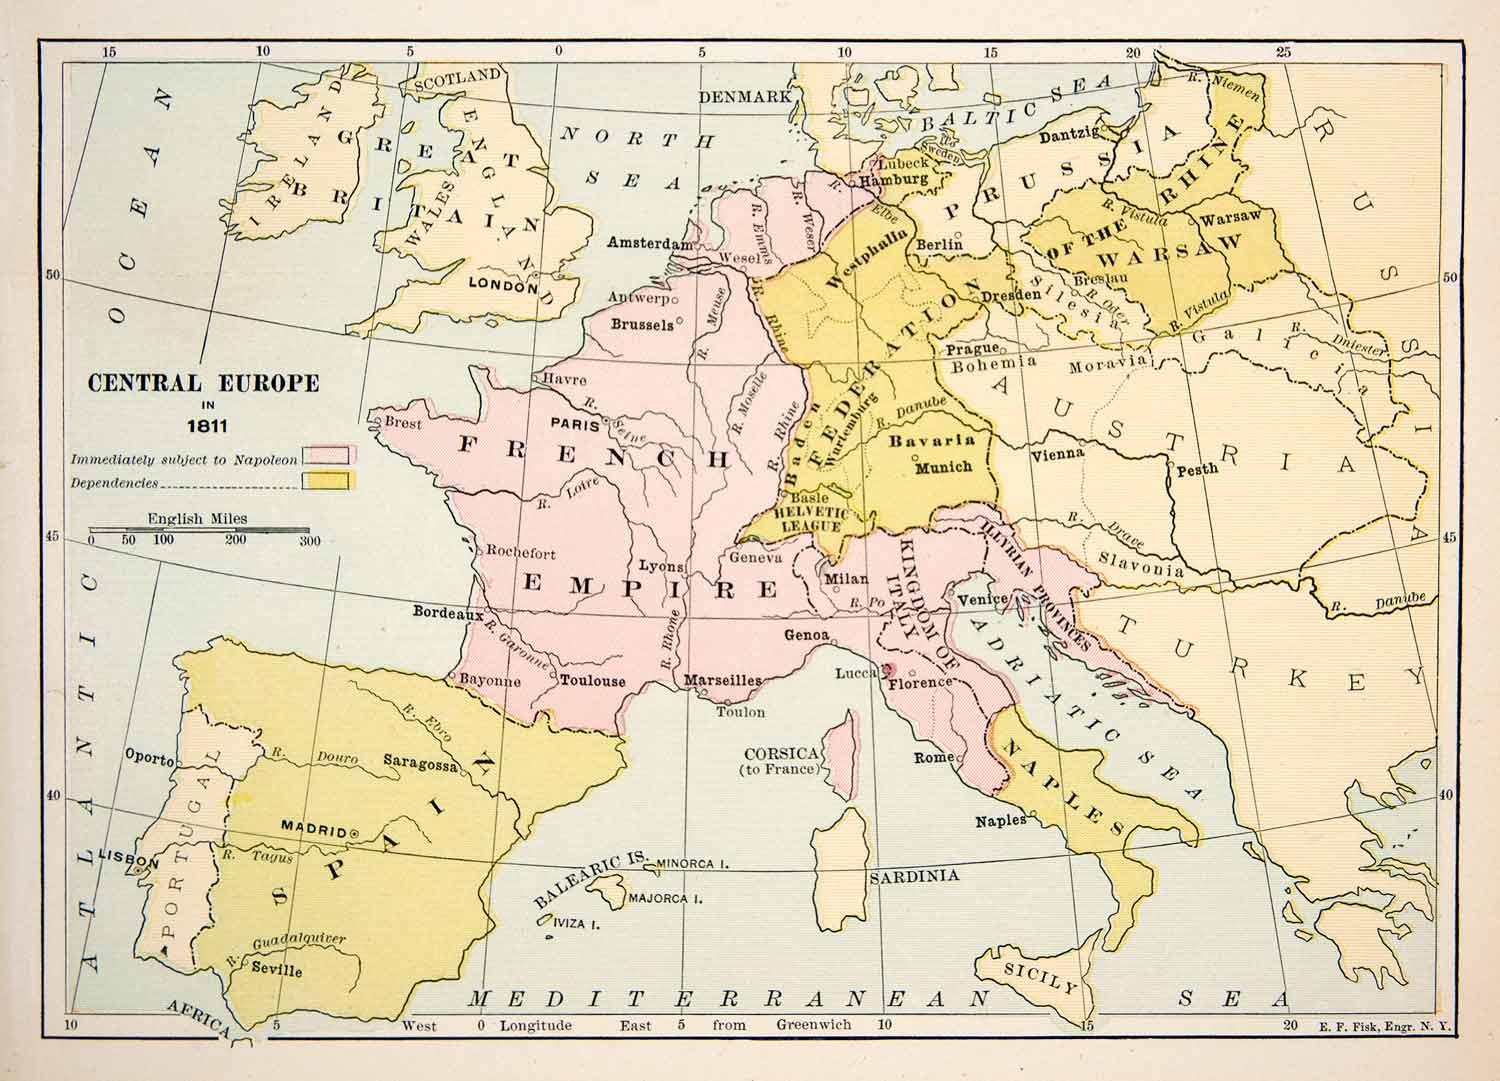 1891 Print Antique 1811 Map Central Europe England Germany Italy France XER5